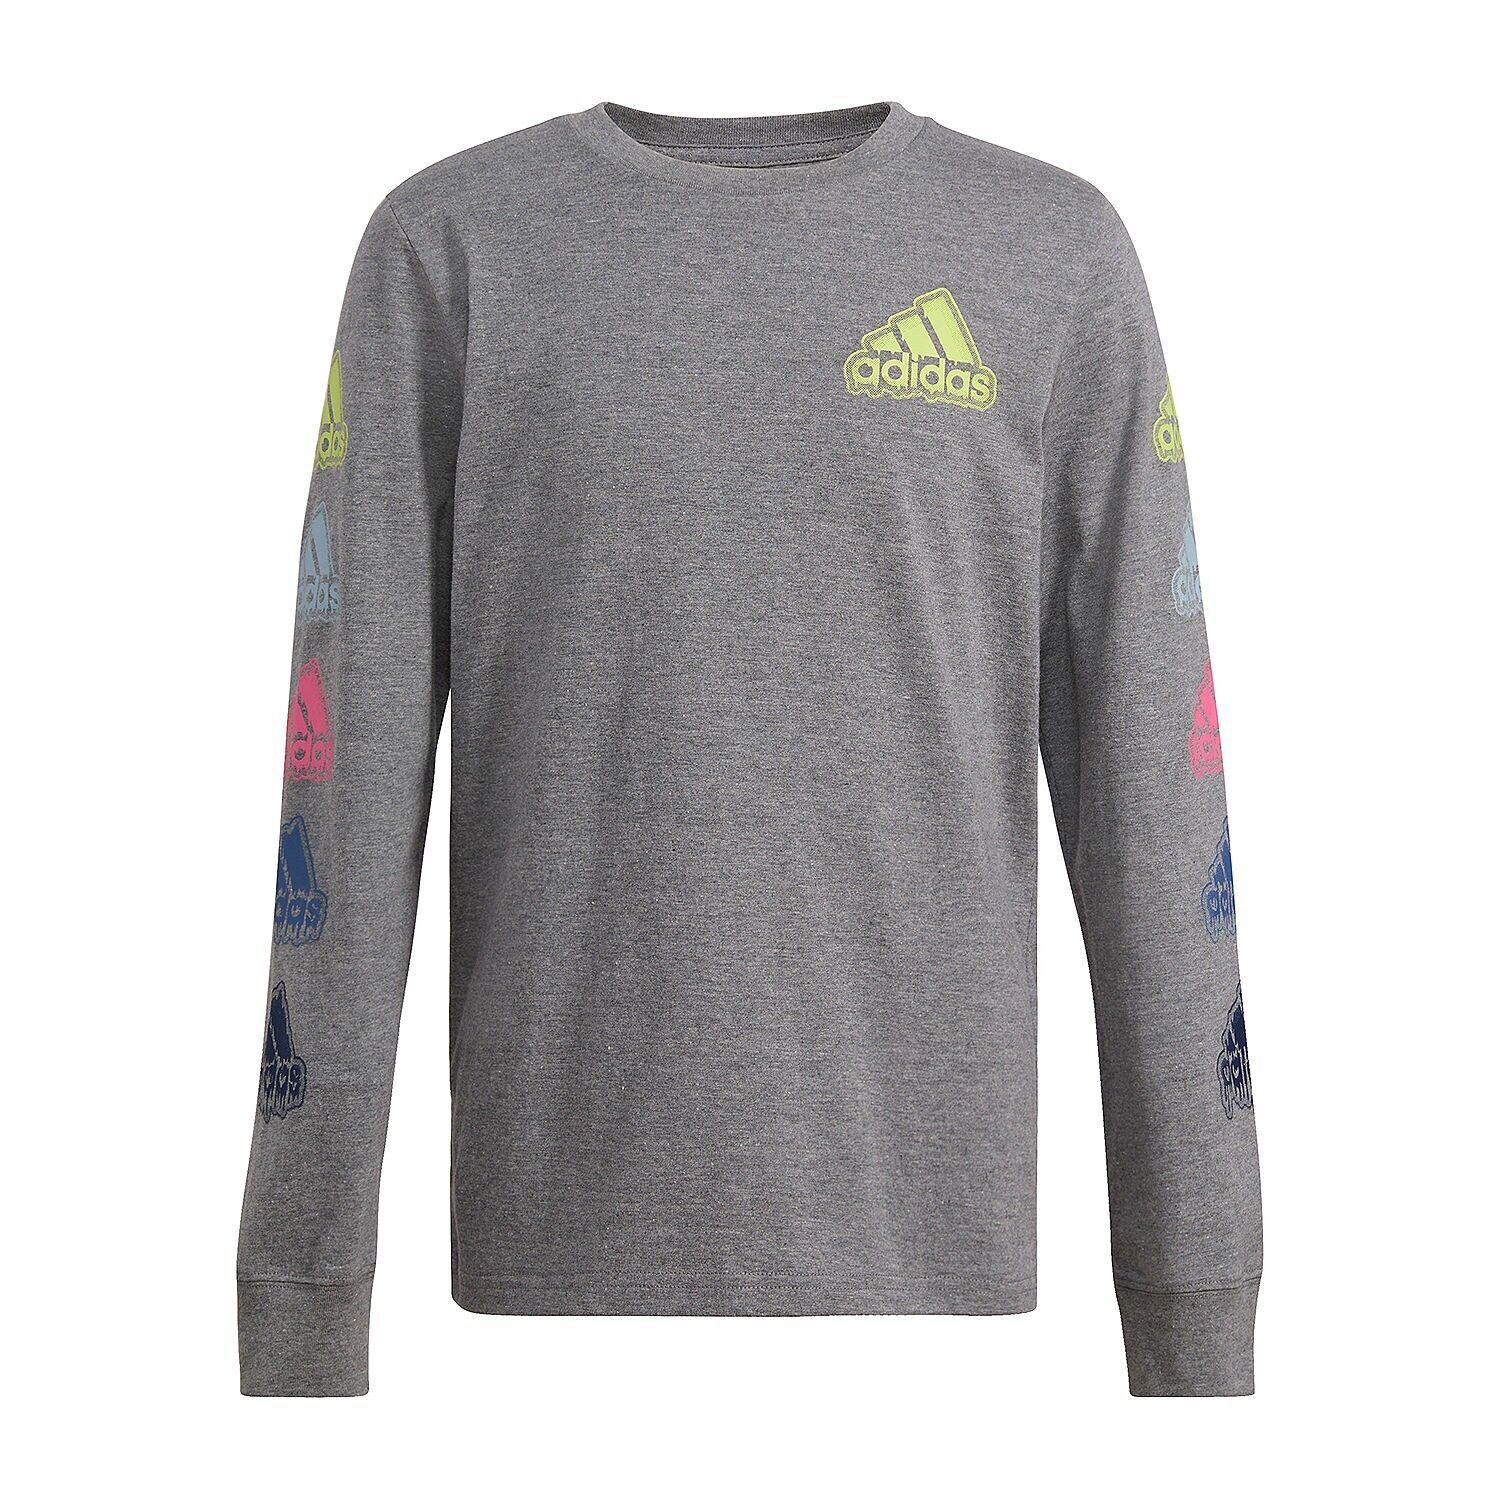 Primary image for adidas Big Boys Crew Neck Long Sleeve Graphic T-Shirt X-Large (18-20) Charcoal H